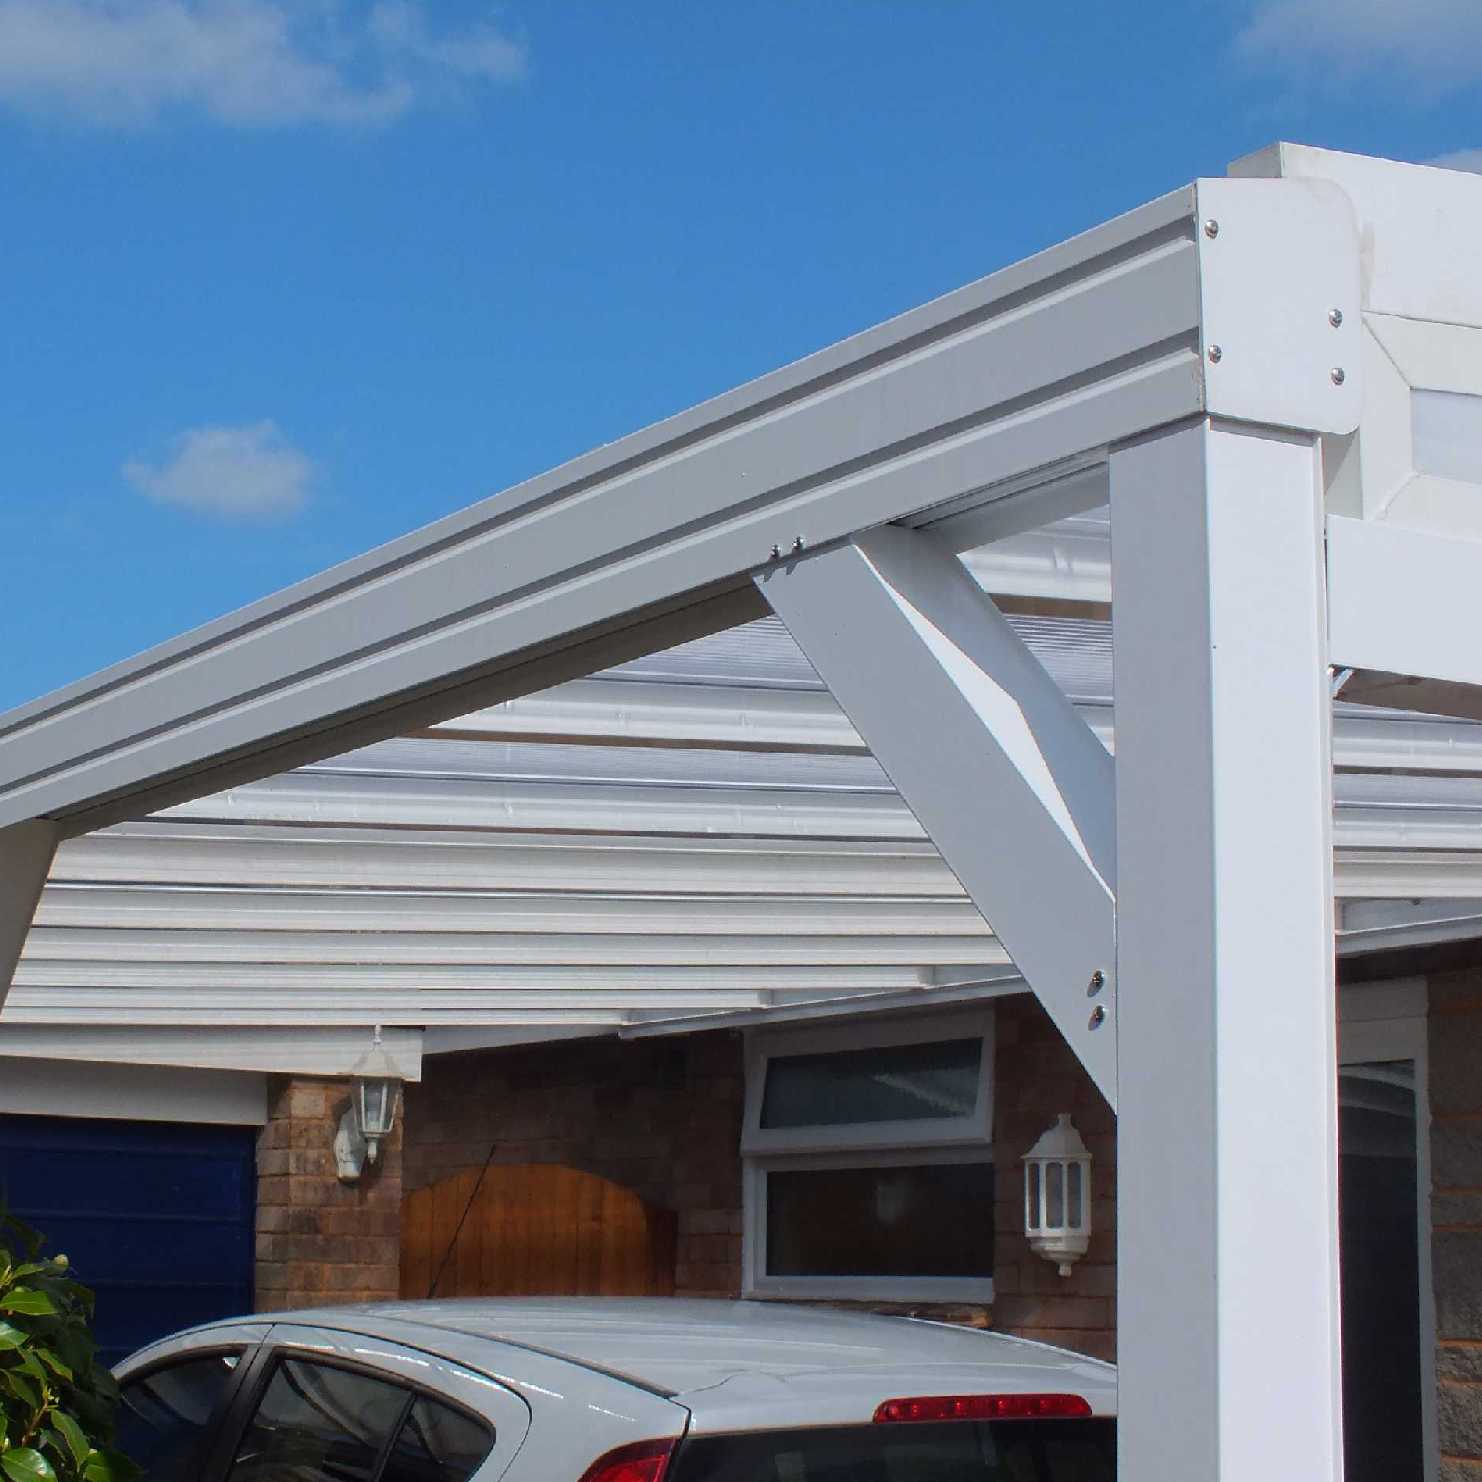 Great deals on Omega Smart Lean-To Canopy, White with 16mm Polycarbonate Glazing - 10.6m (W) x 3.5m (P), (5) Supporting Posts